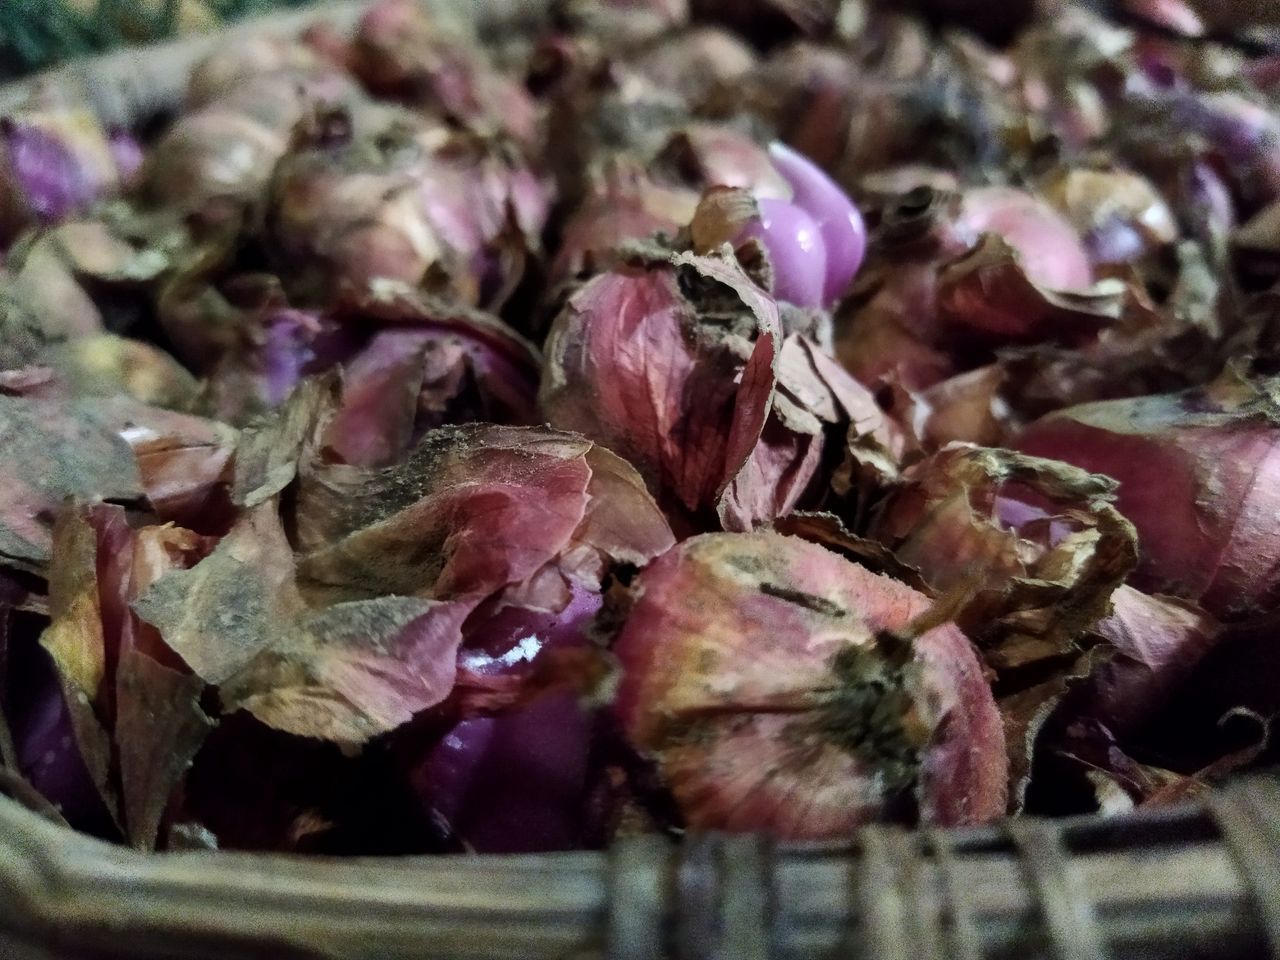 food and drink, food, freshness, shallot, purple, vegetable, produce, flower, close-up, healthy eating, wellbeing, no people, plant, large group of objects, red onion, still life, selective focus, abundance, market, indoors, onion, raw food, petal